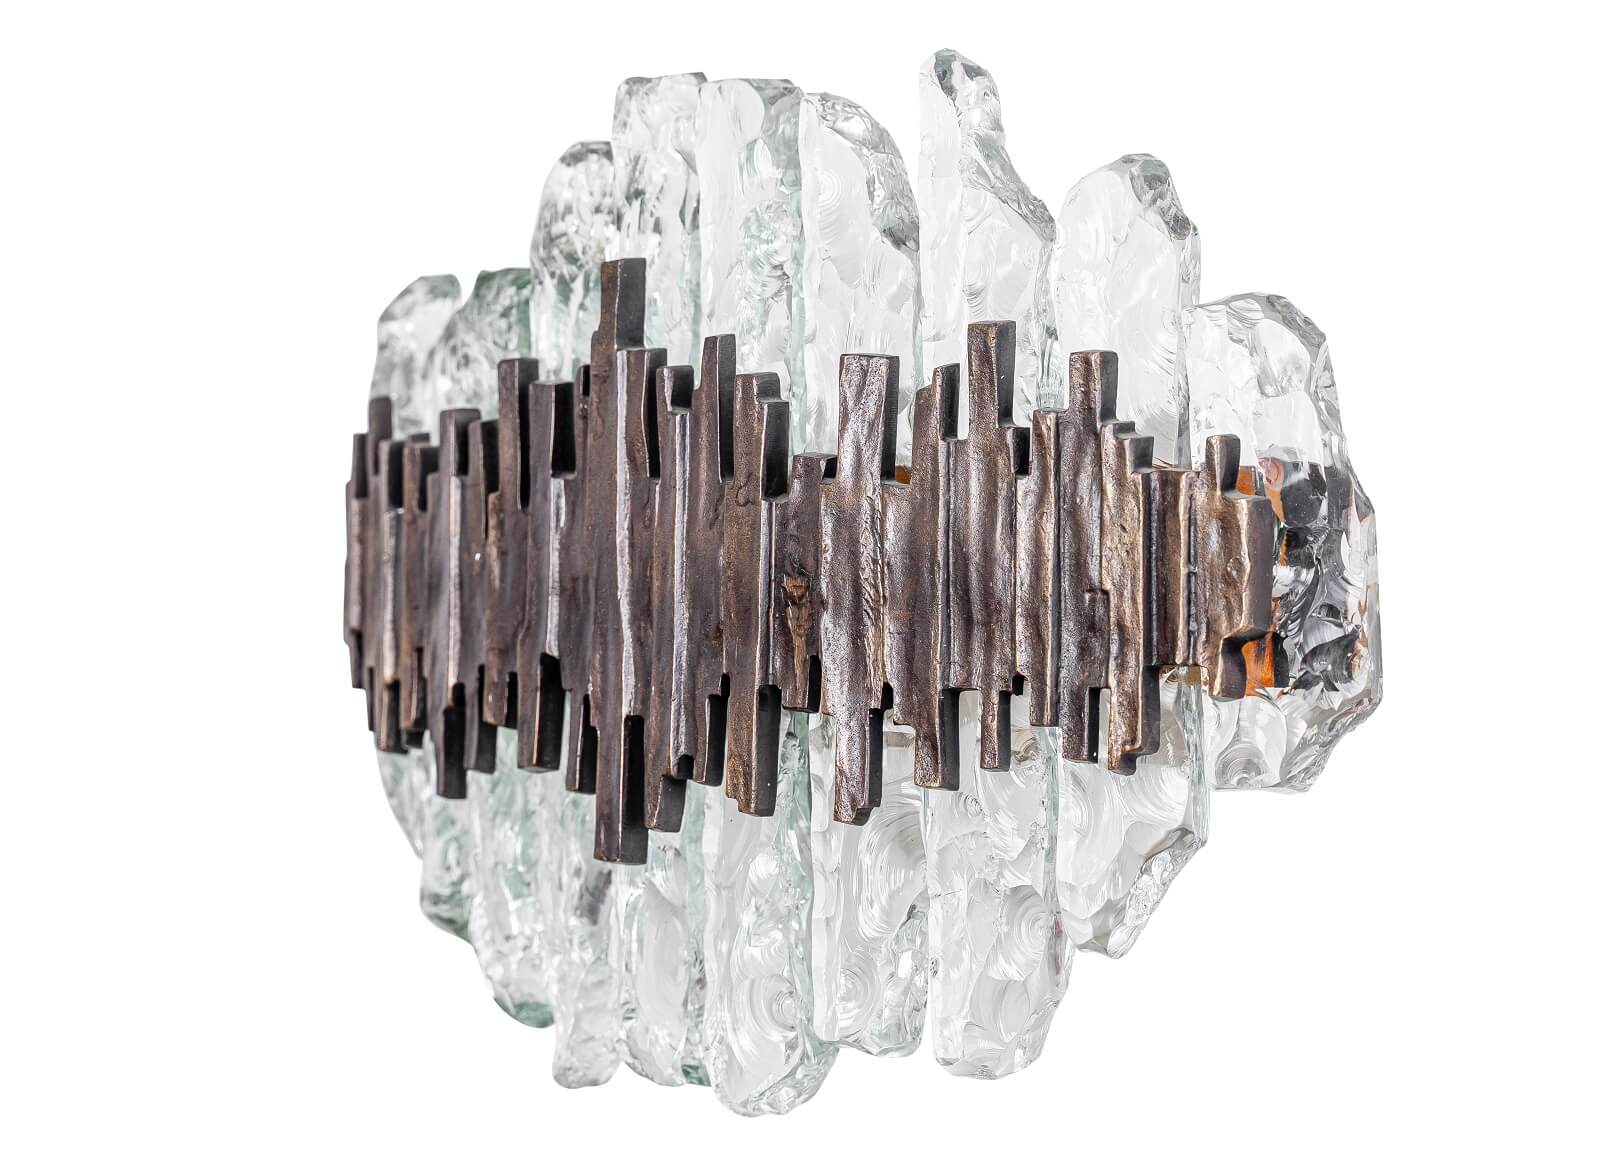 Wall lamp mod. 2496 by Max Ingrand for sale